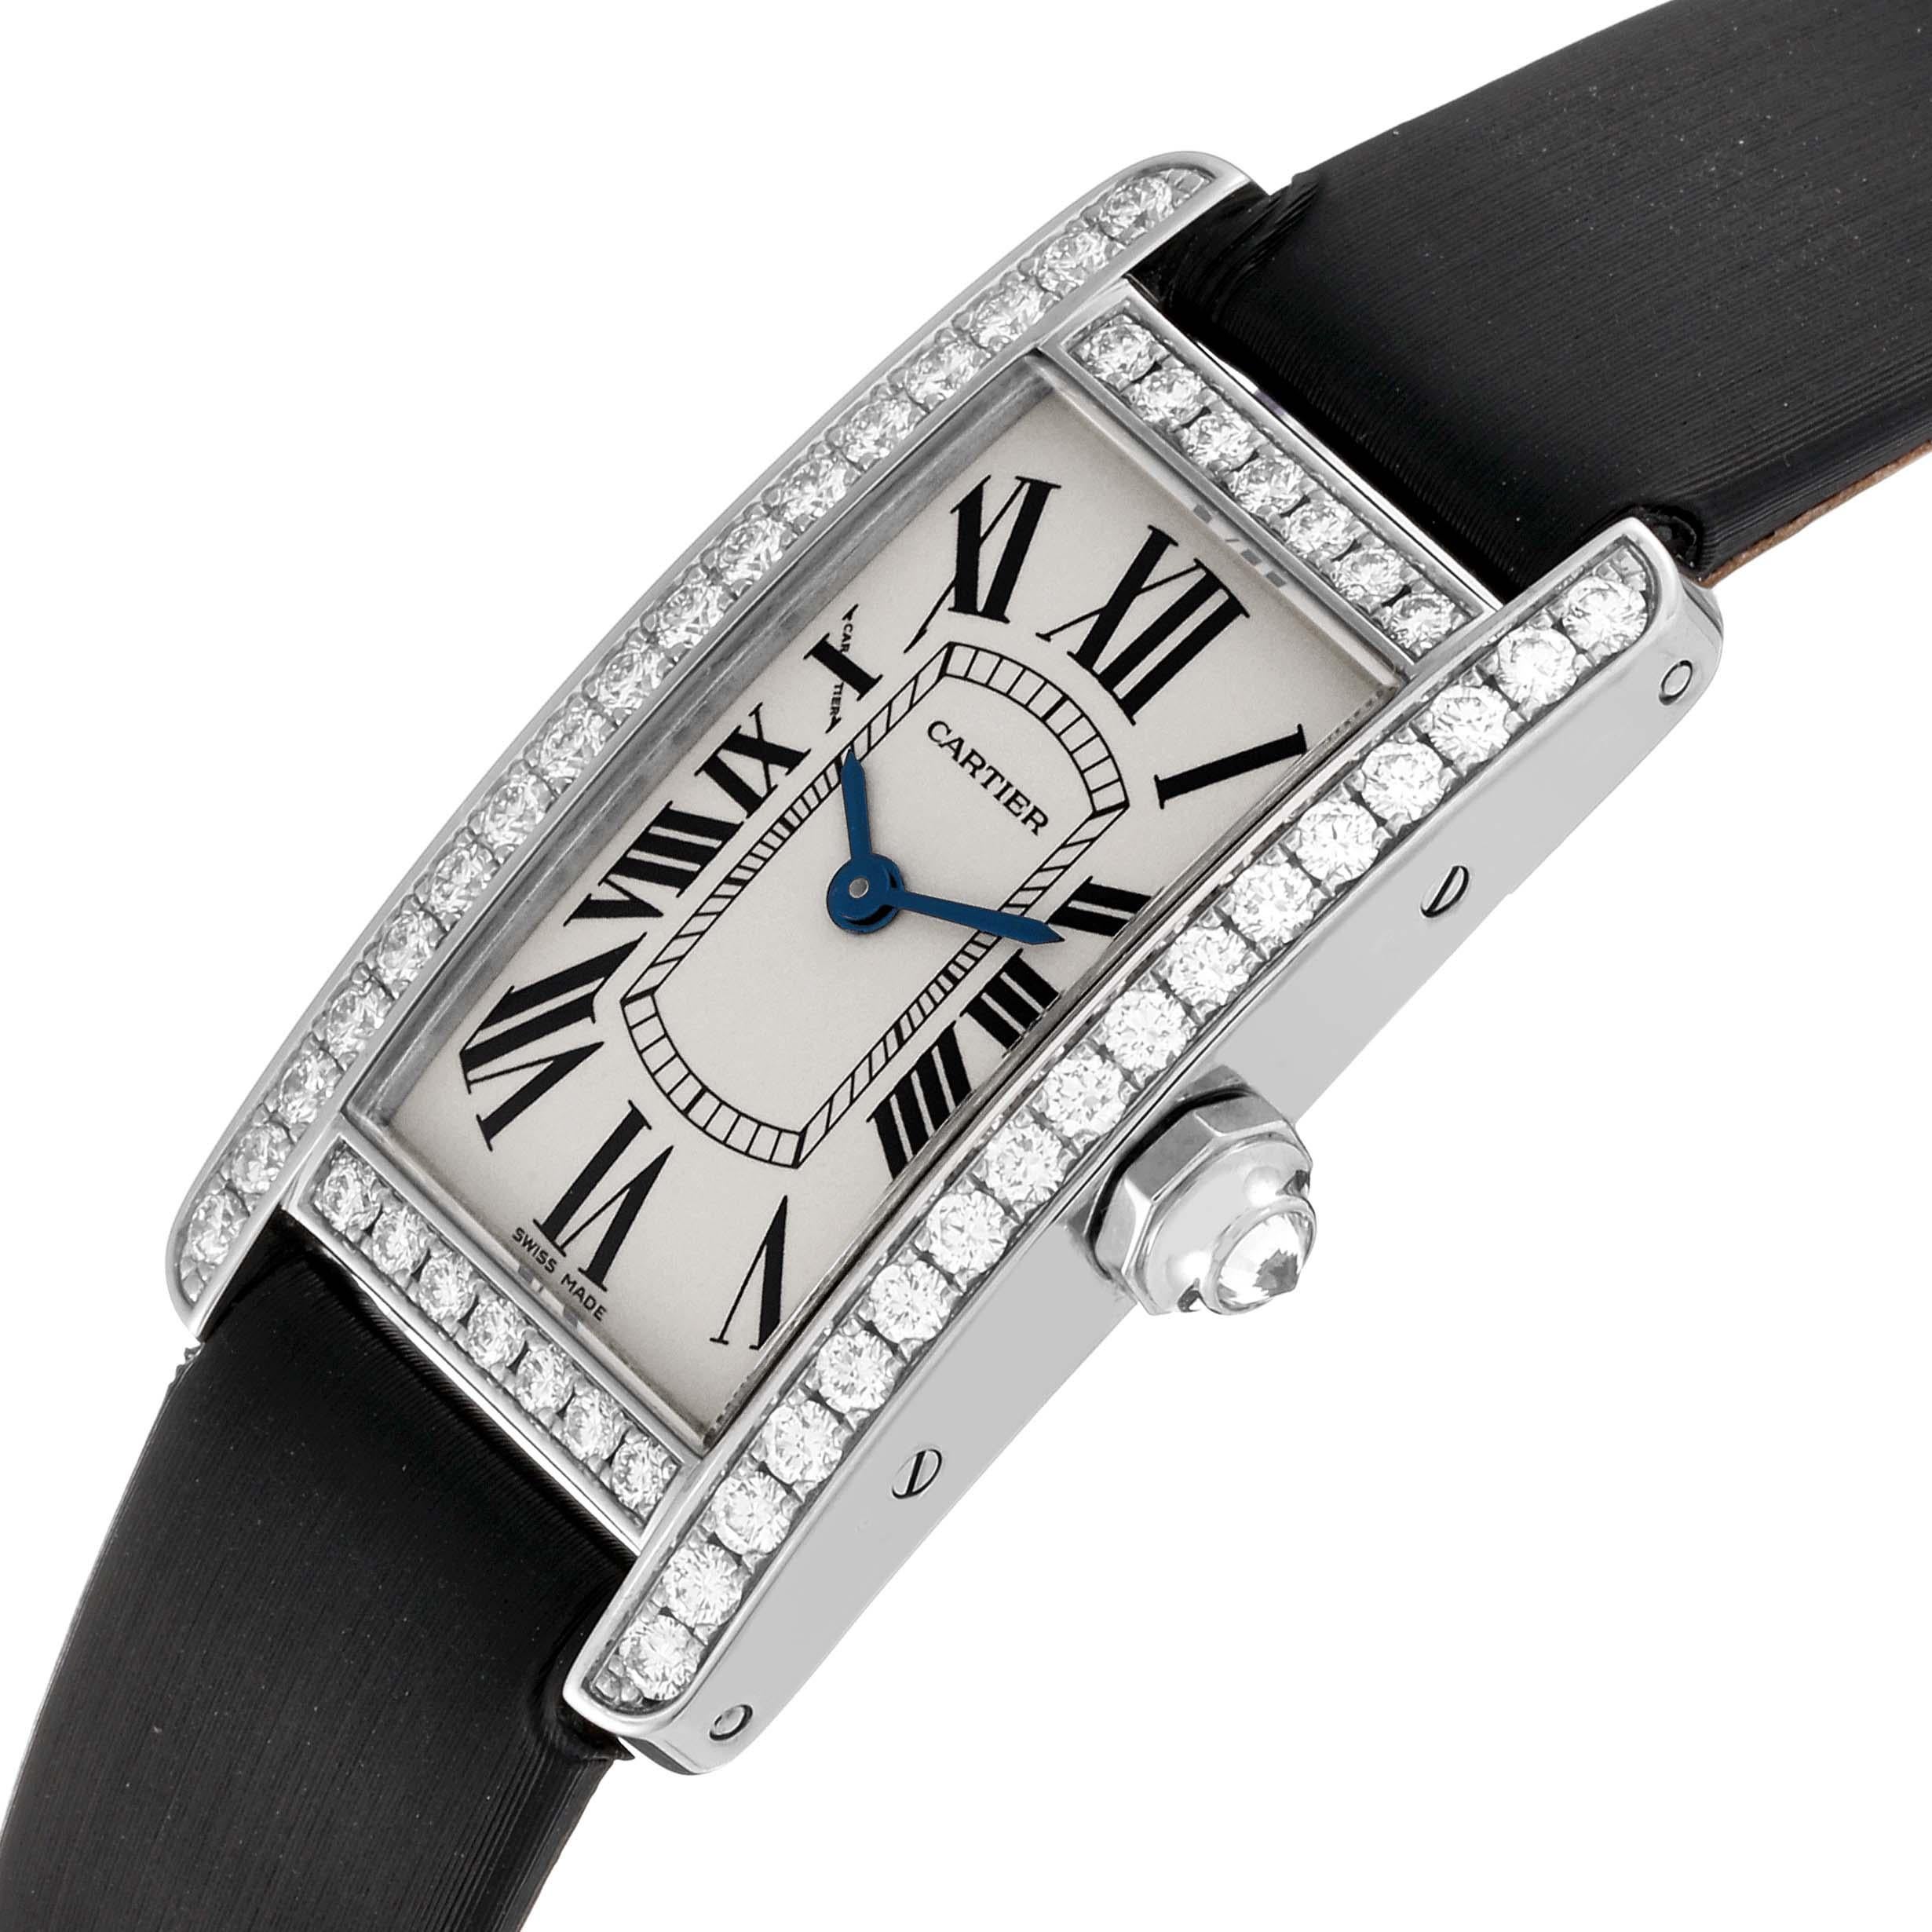 Cartier Tank Americaine White Gold Diamond Ladies Watch WB707331 For Sale 5